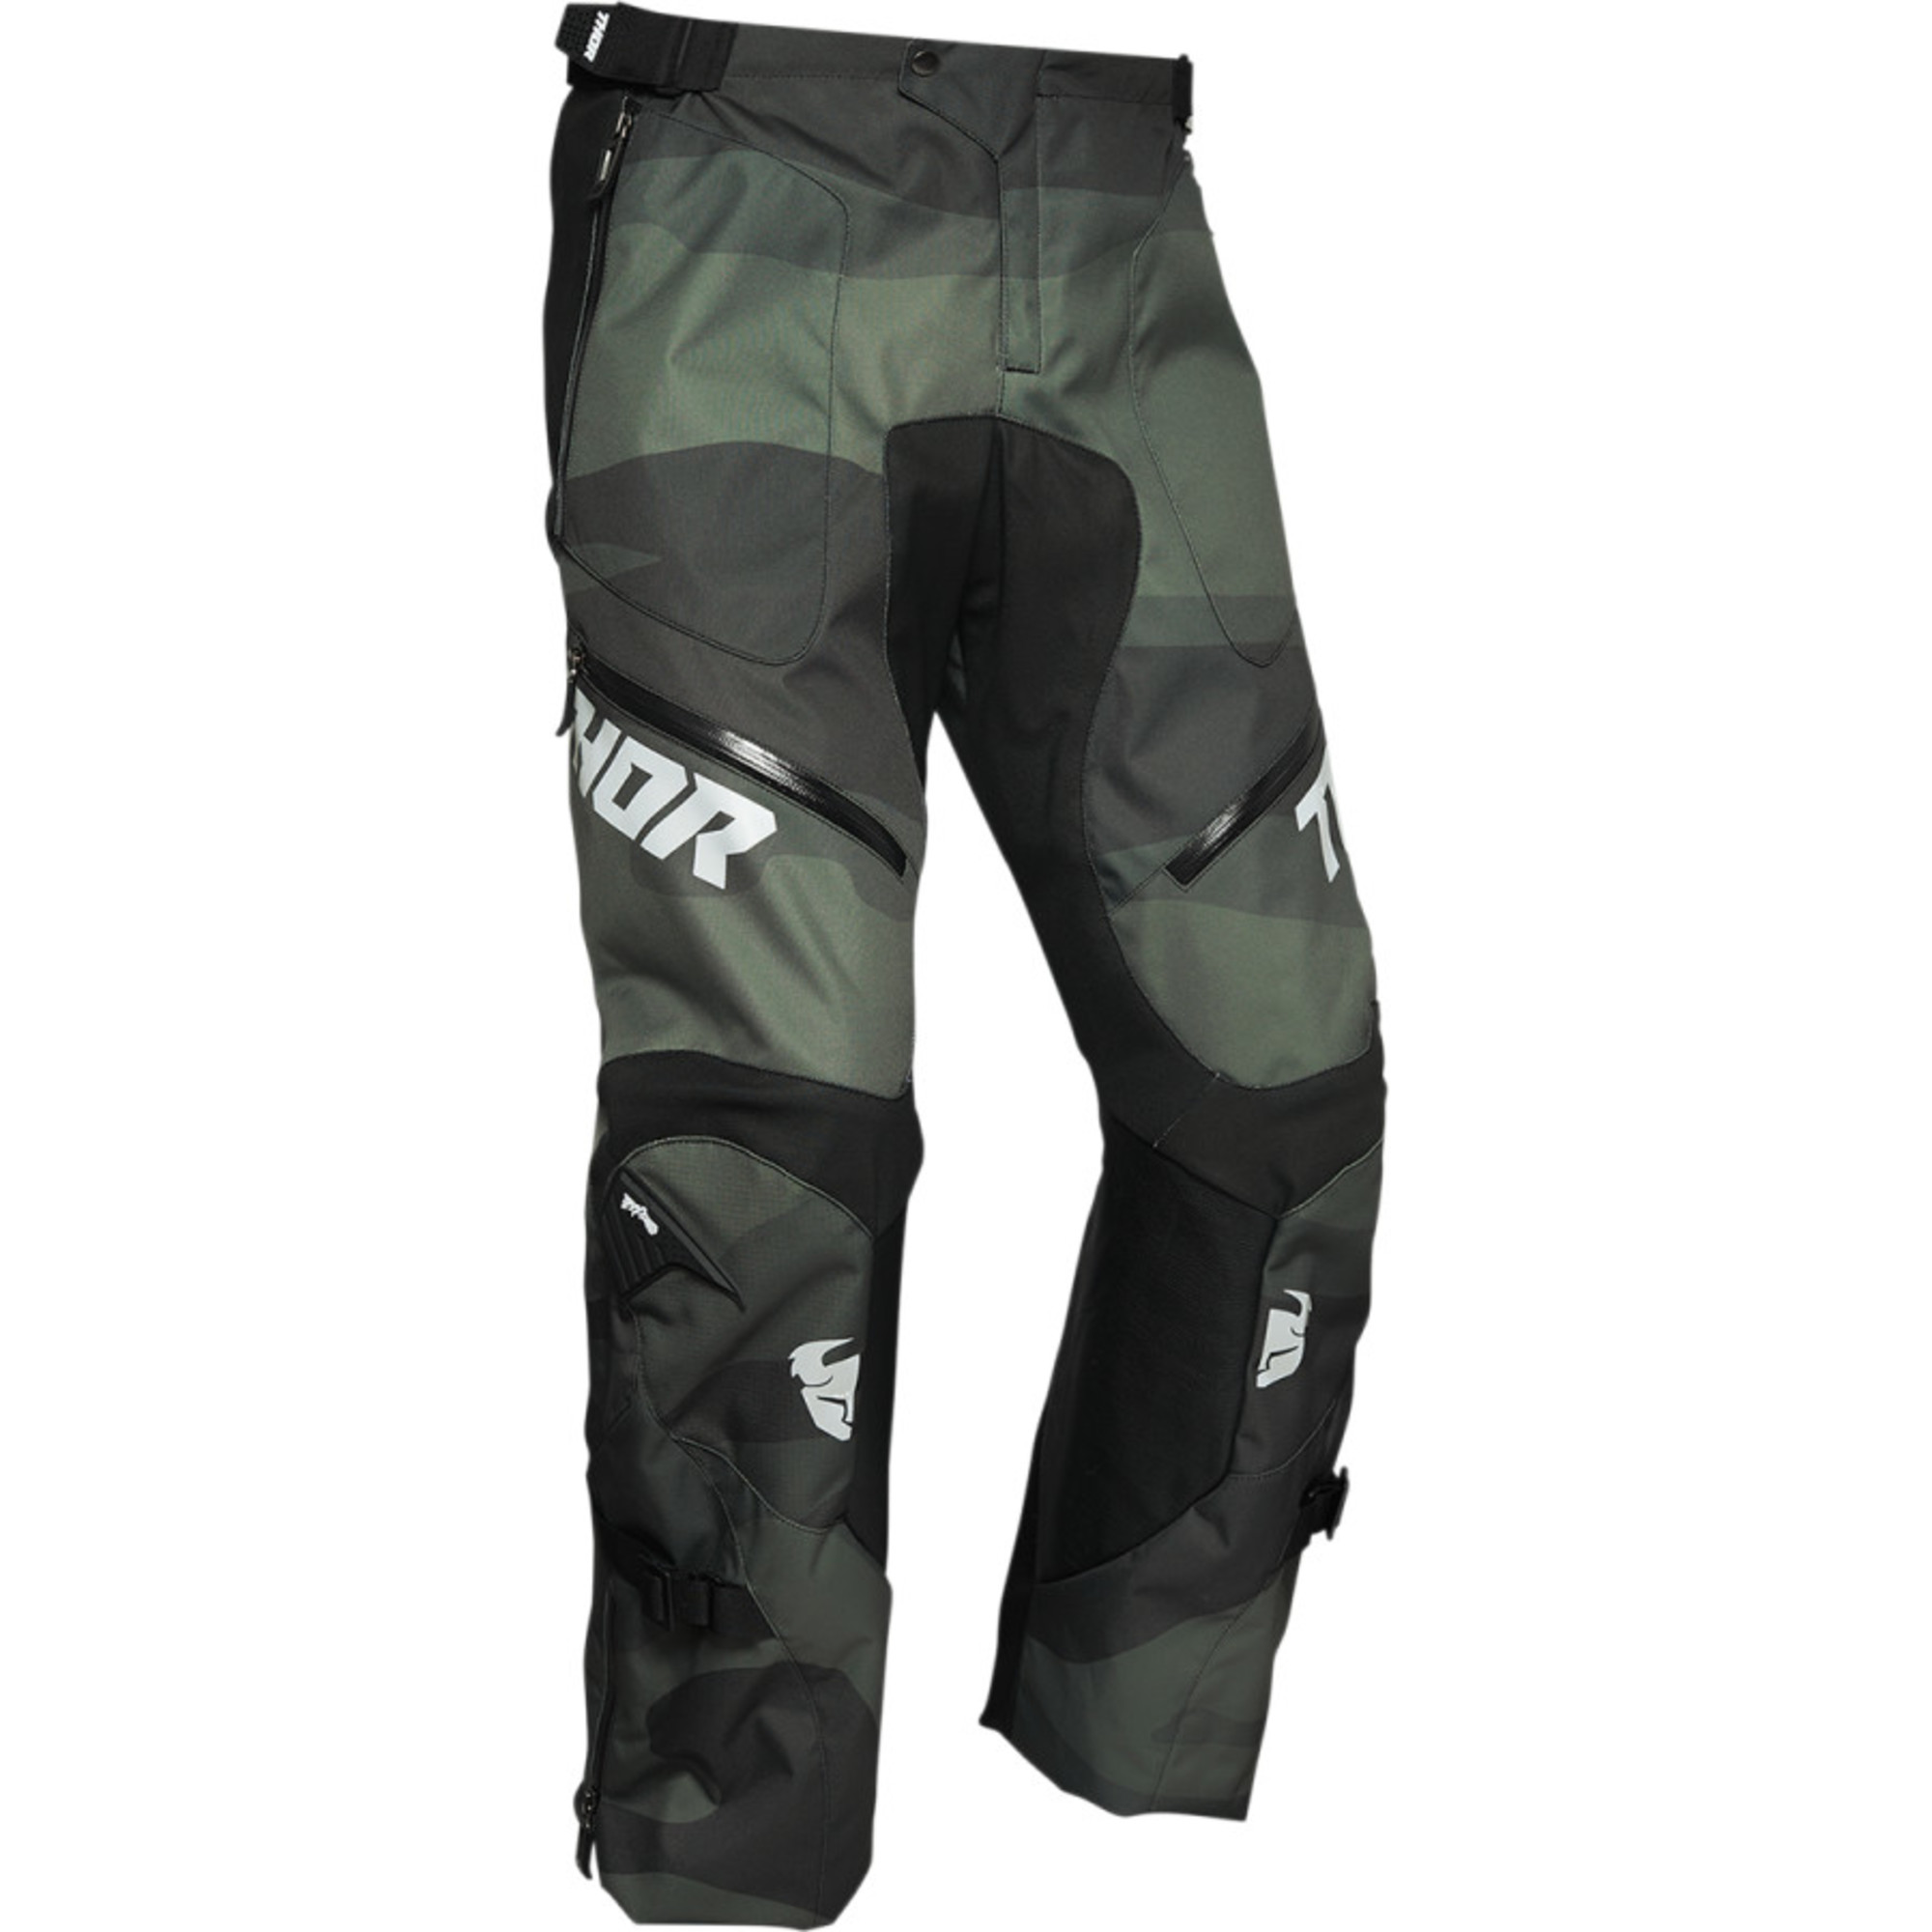 thor pants for men terrain over the boot